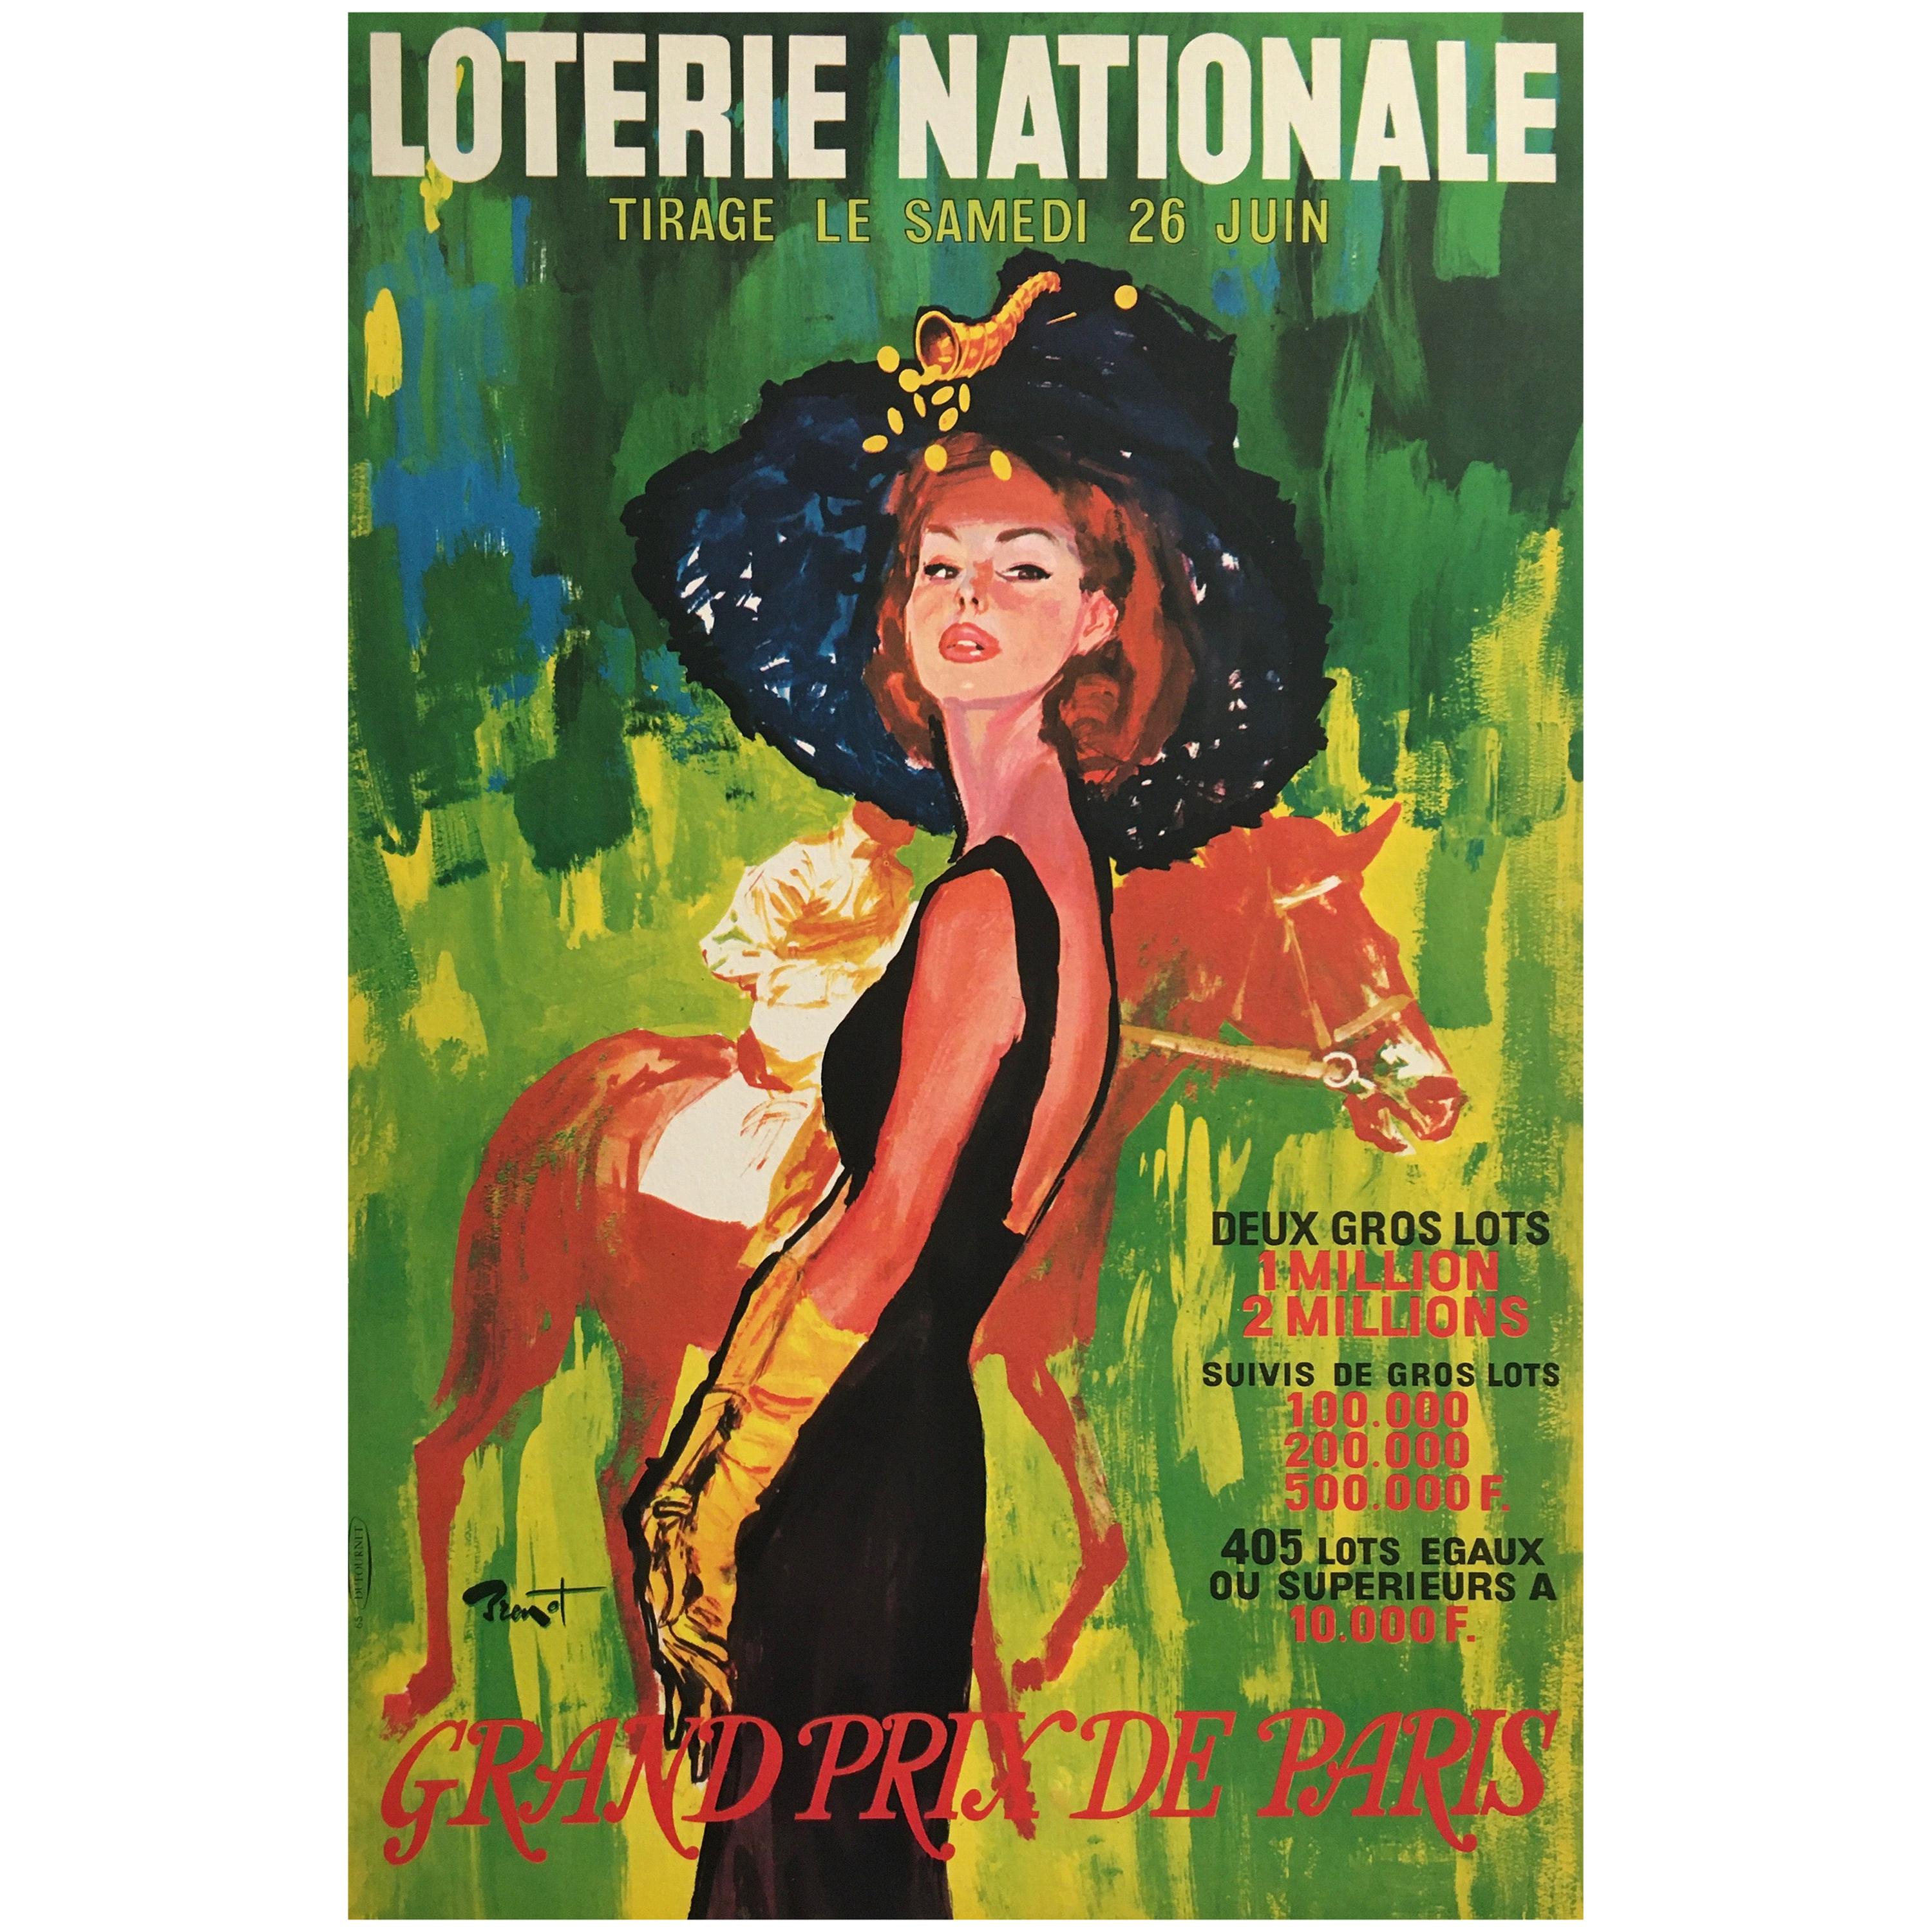 'Loterie Nationale' Original Vintage French Lithograph Poster, by Brenot, 1965